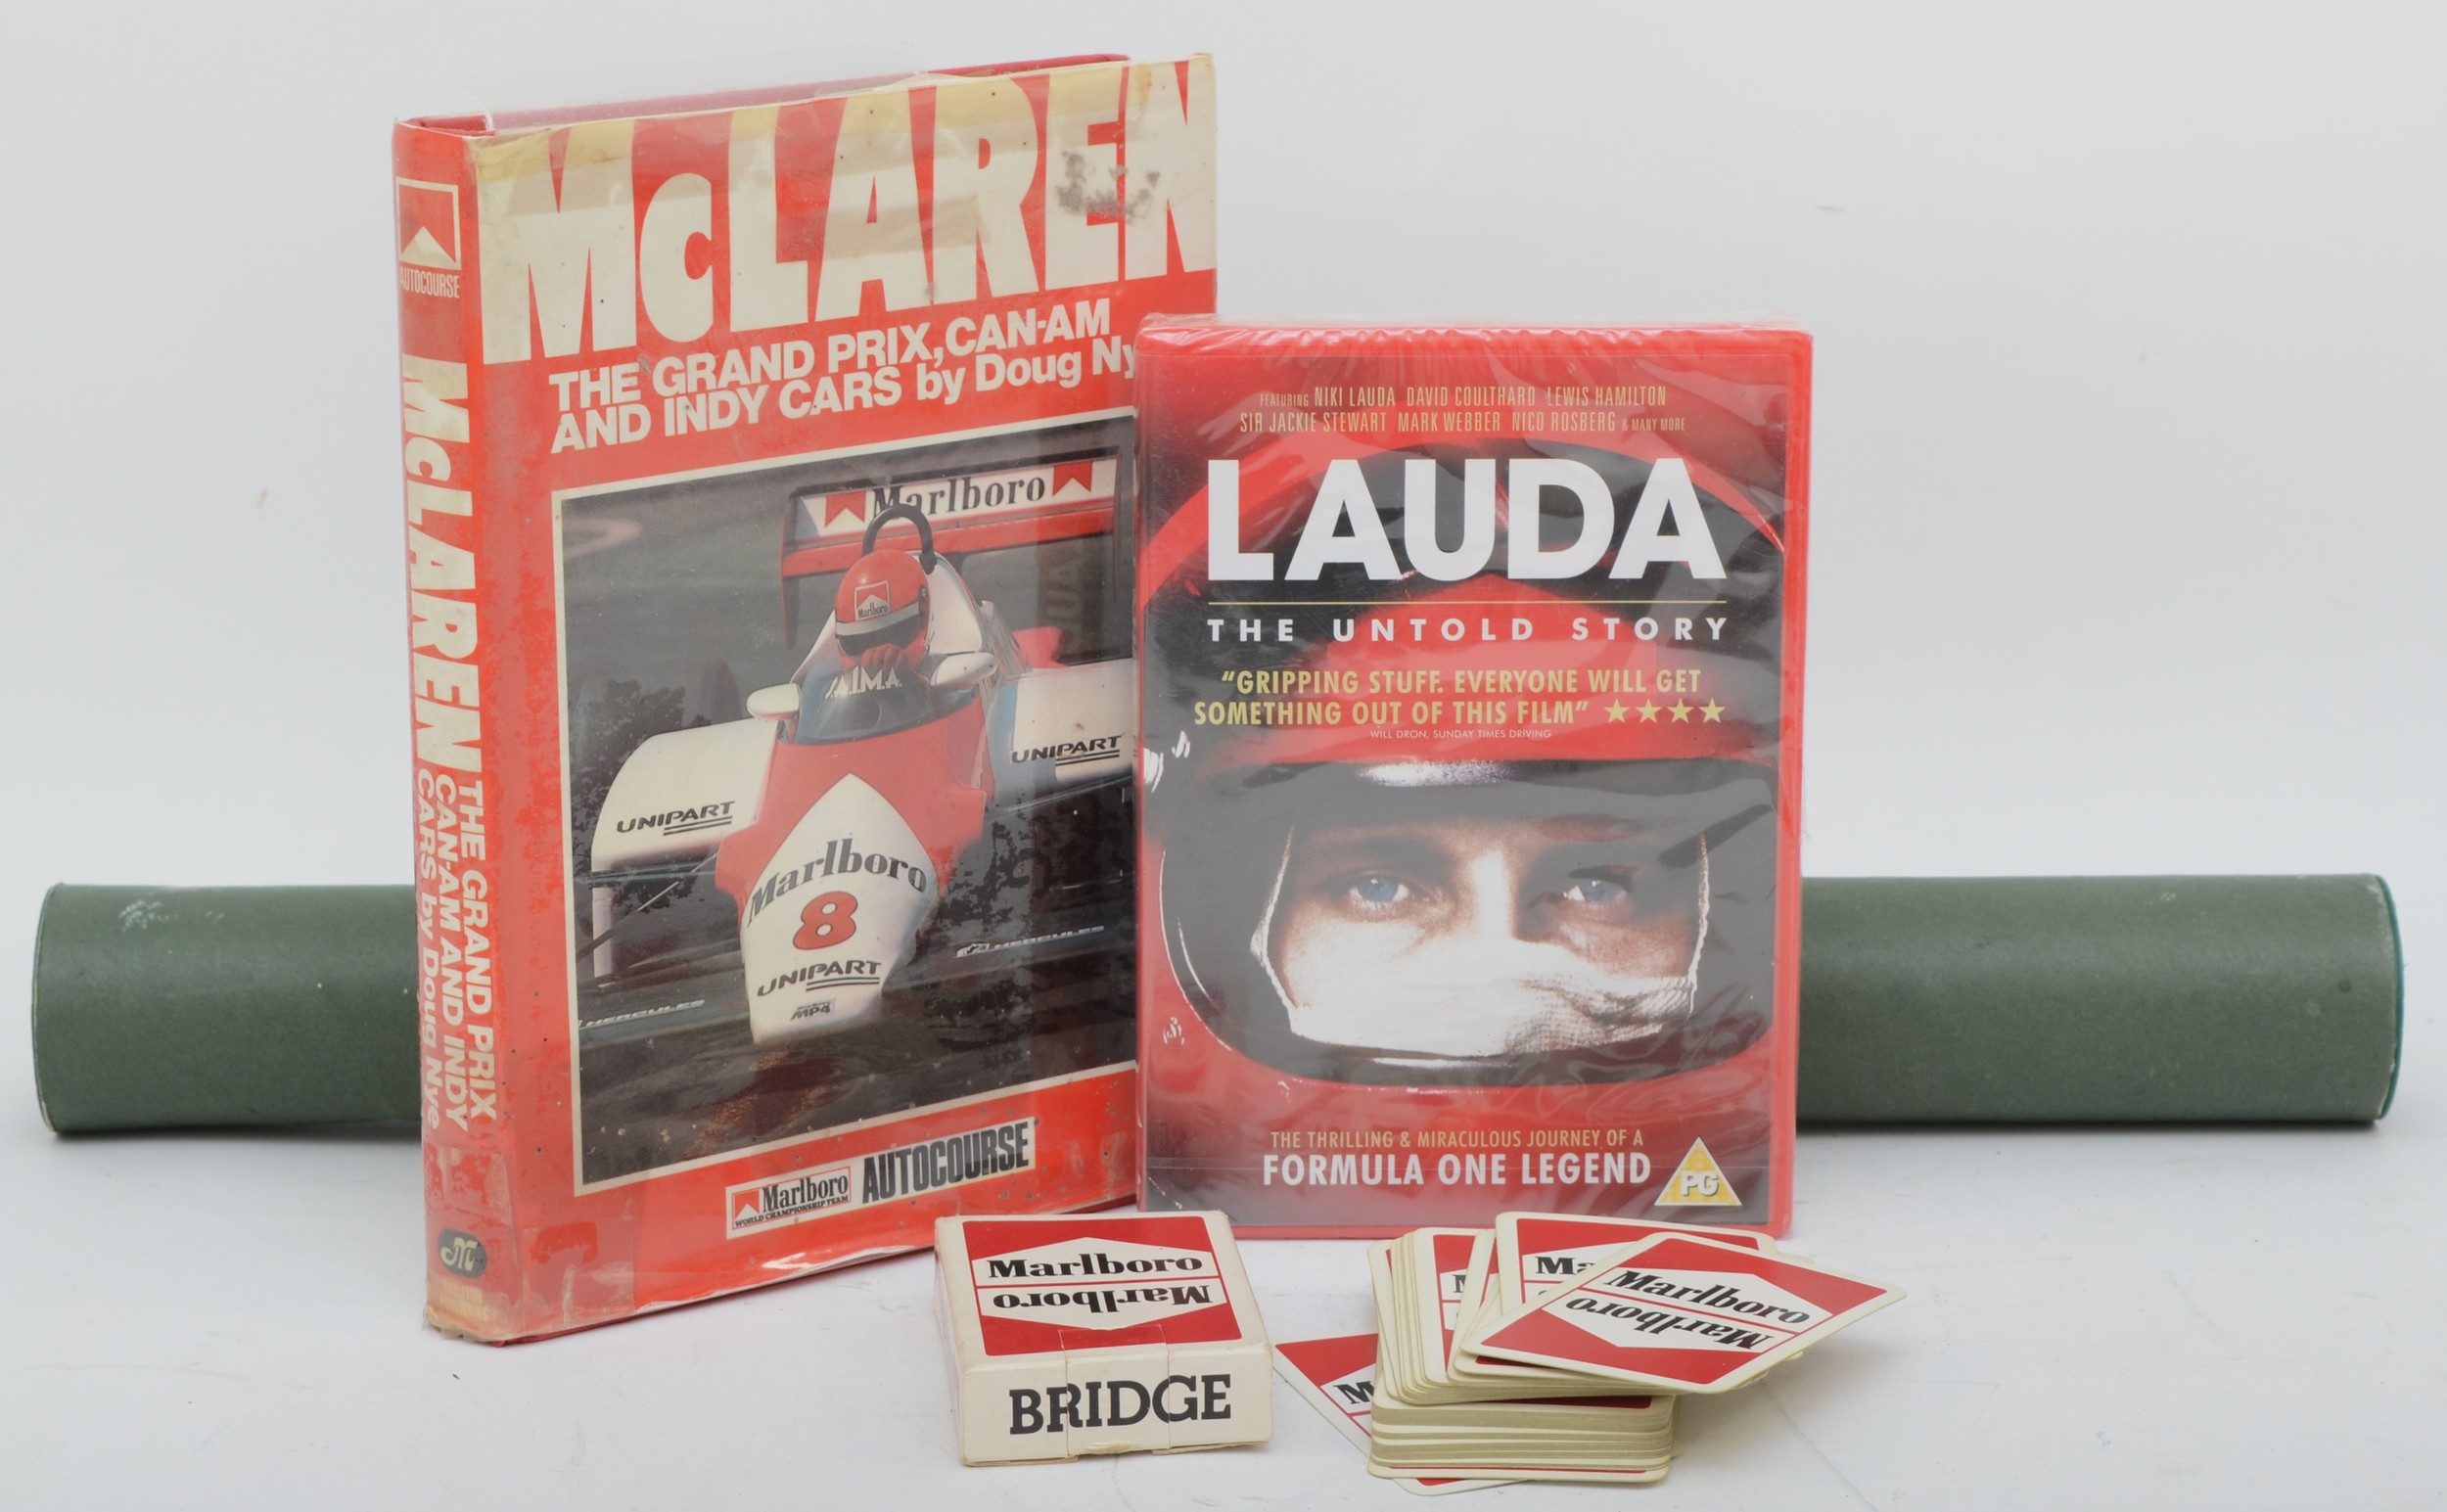 Niki Lauda interest; McLaren; The Grand Prix, Can-Am and Indy Cars by Doug Nye, 1984, signed by